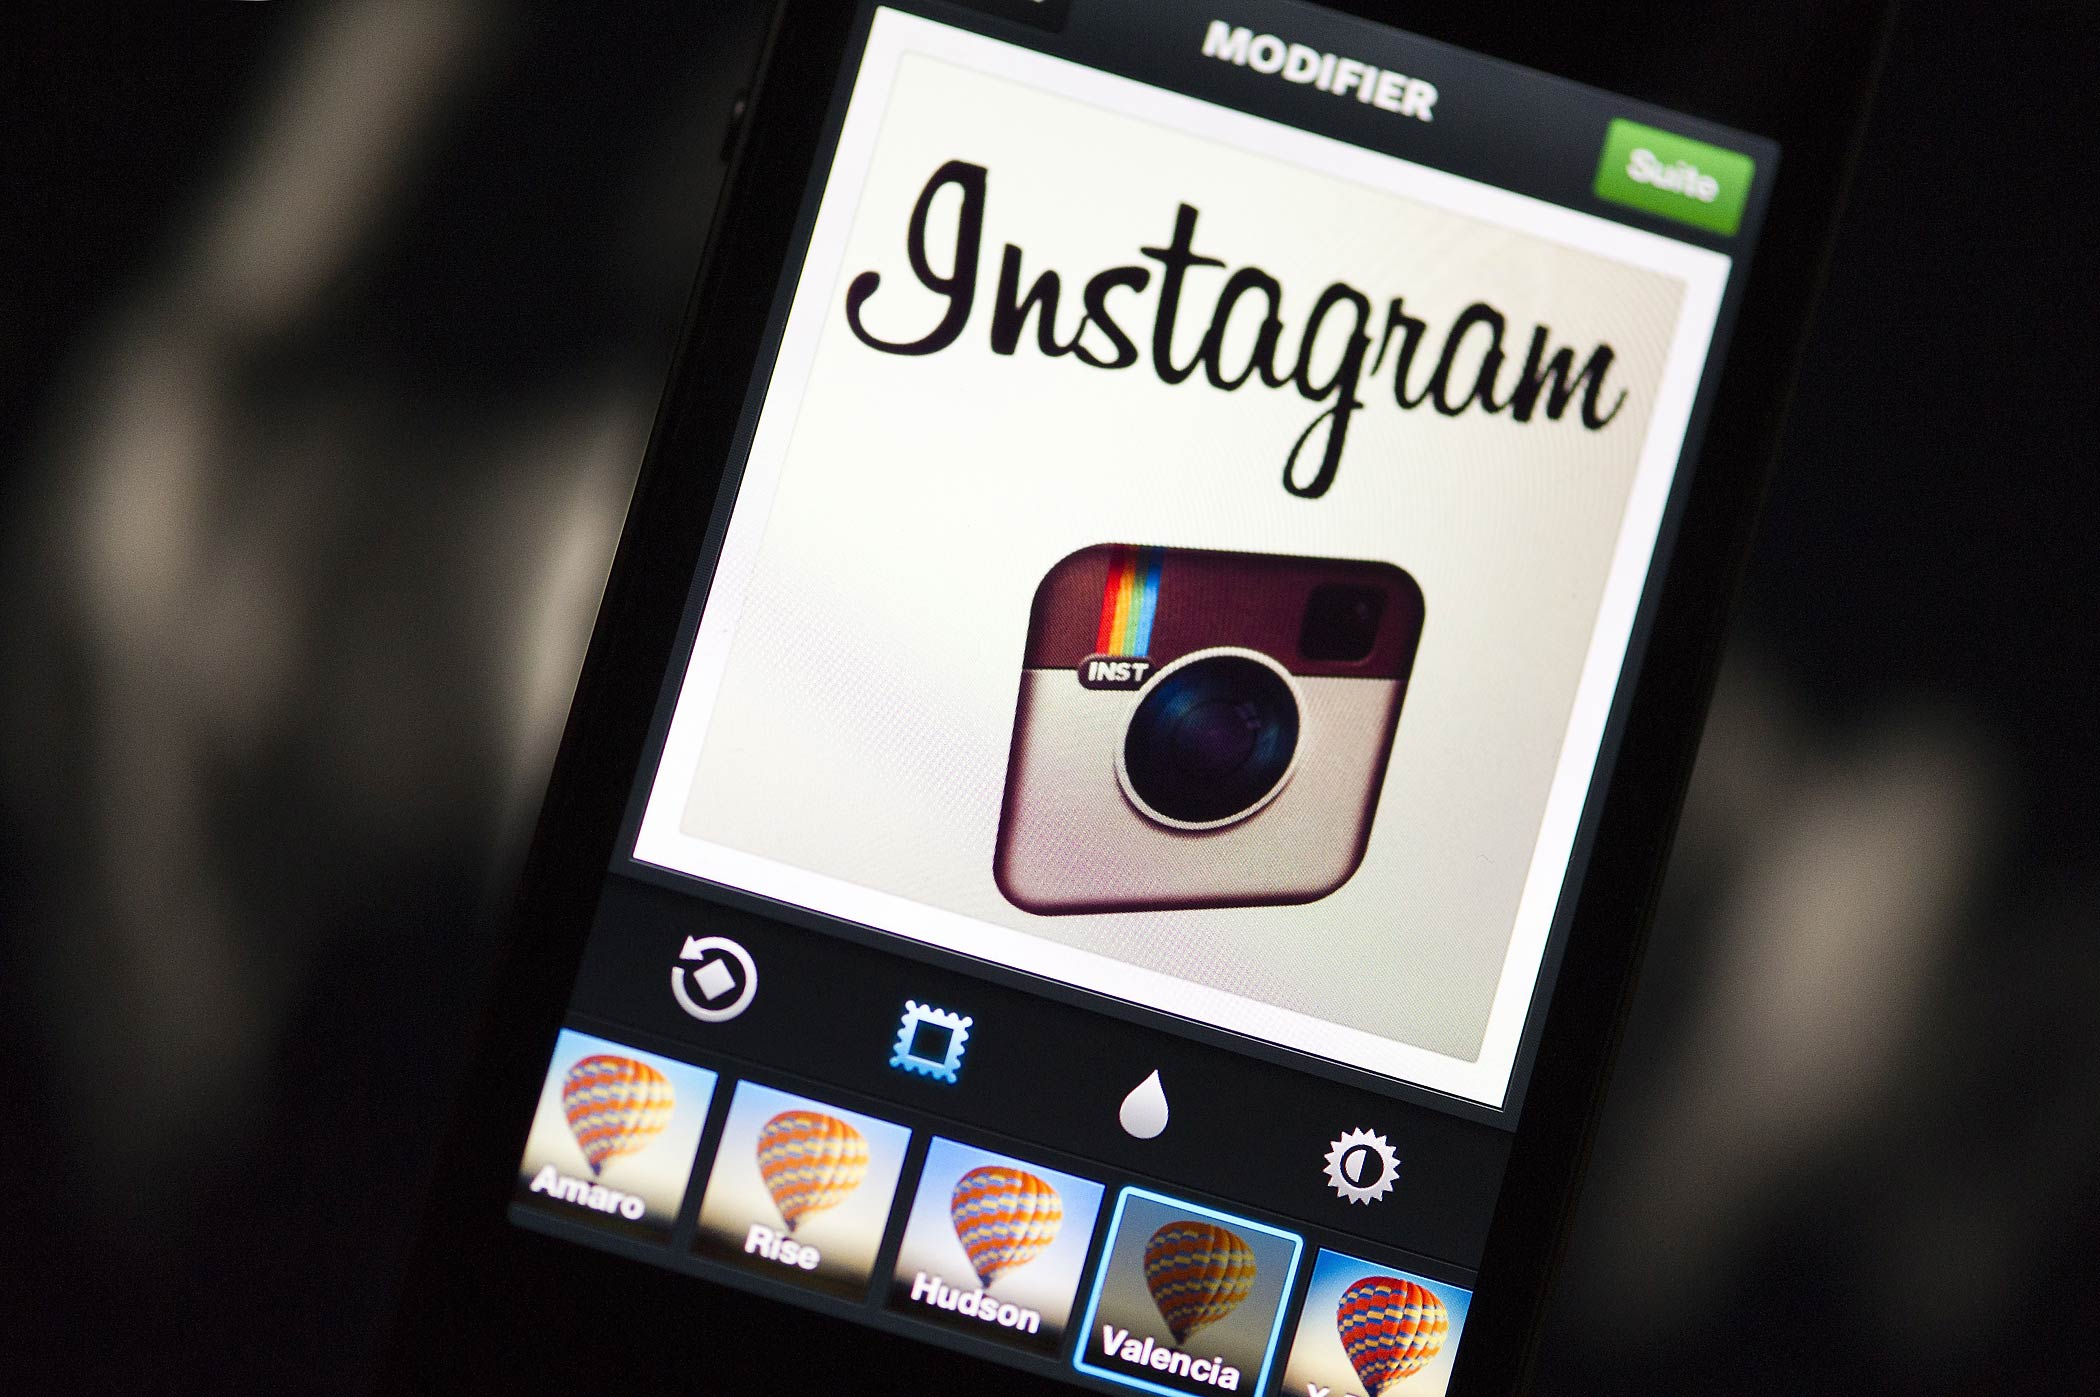 The Instagram logo is displayed on a smartphone on Dec. 20, 2012 in Paris, France.